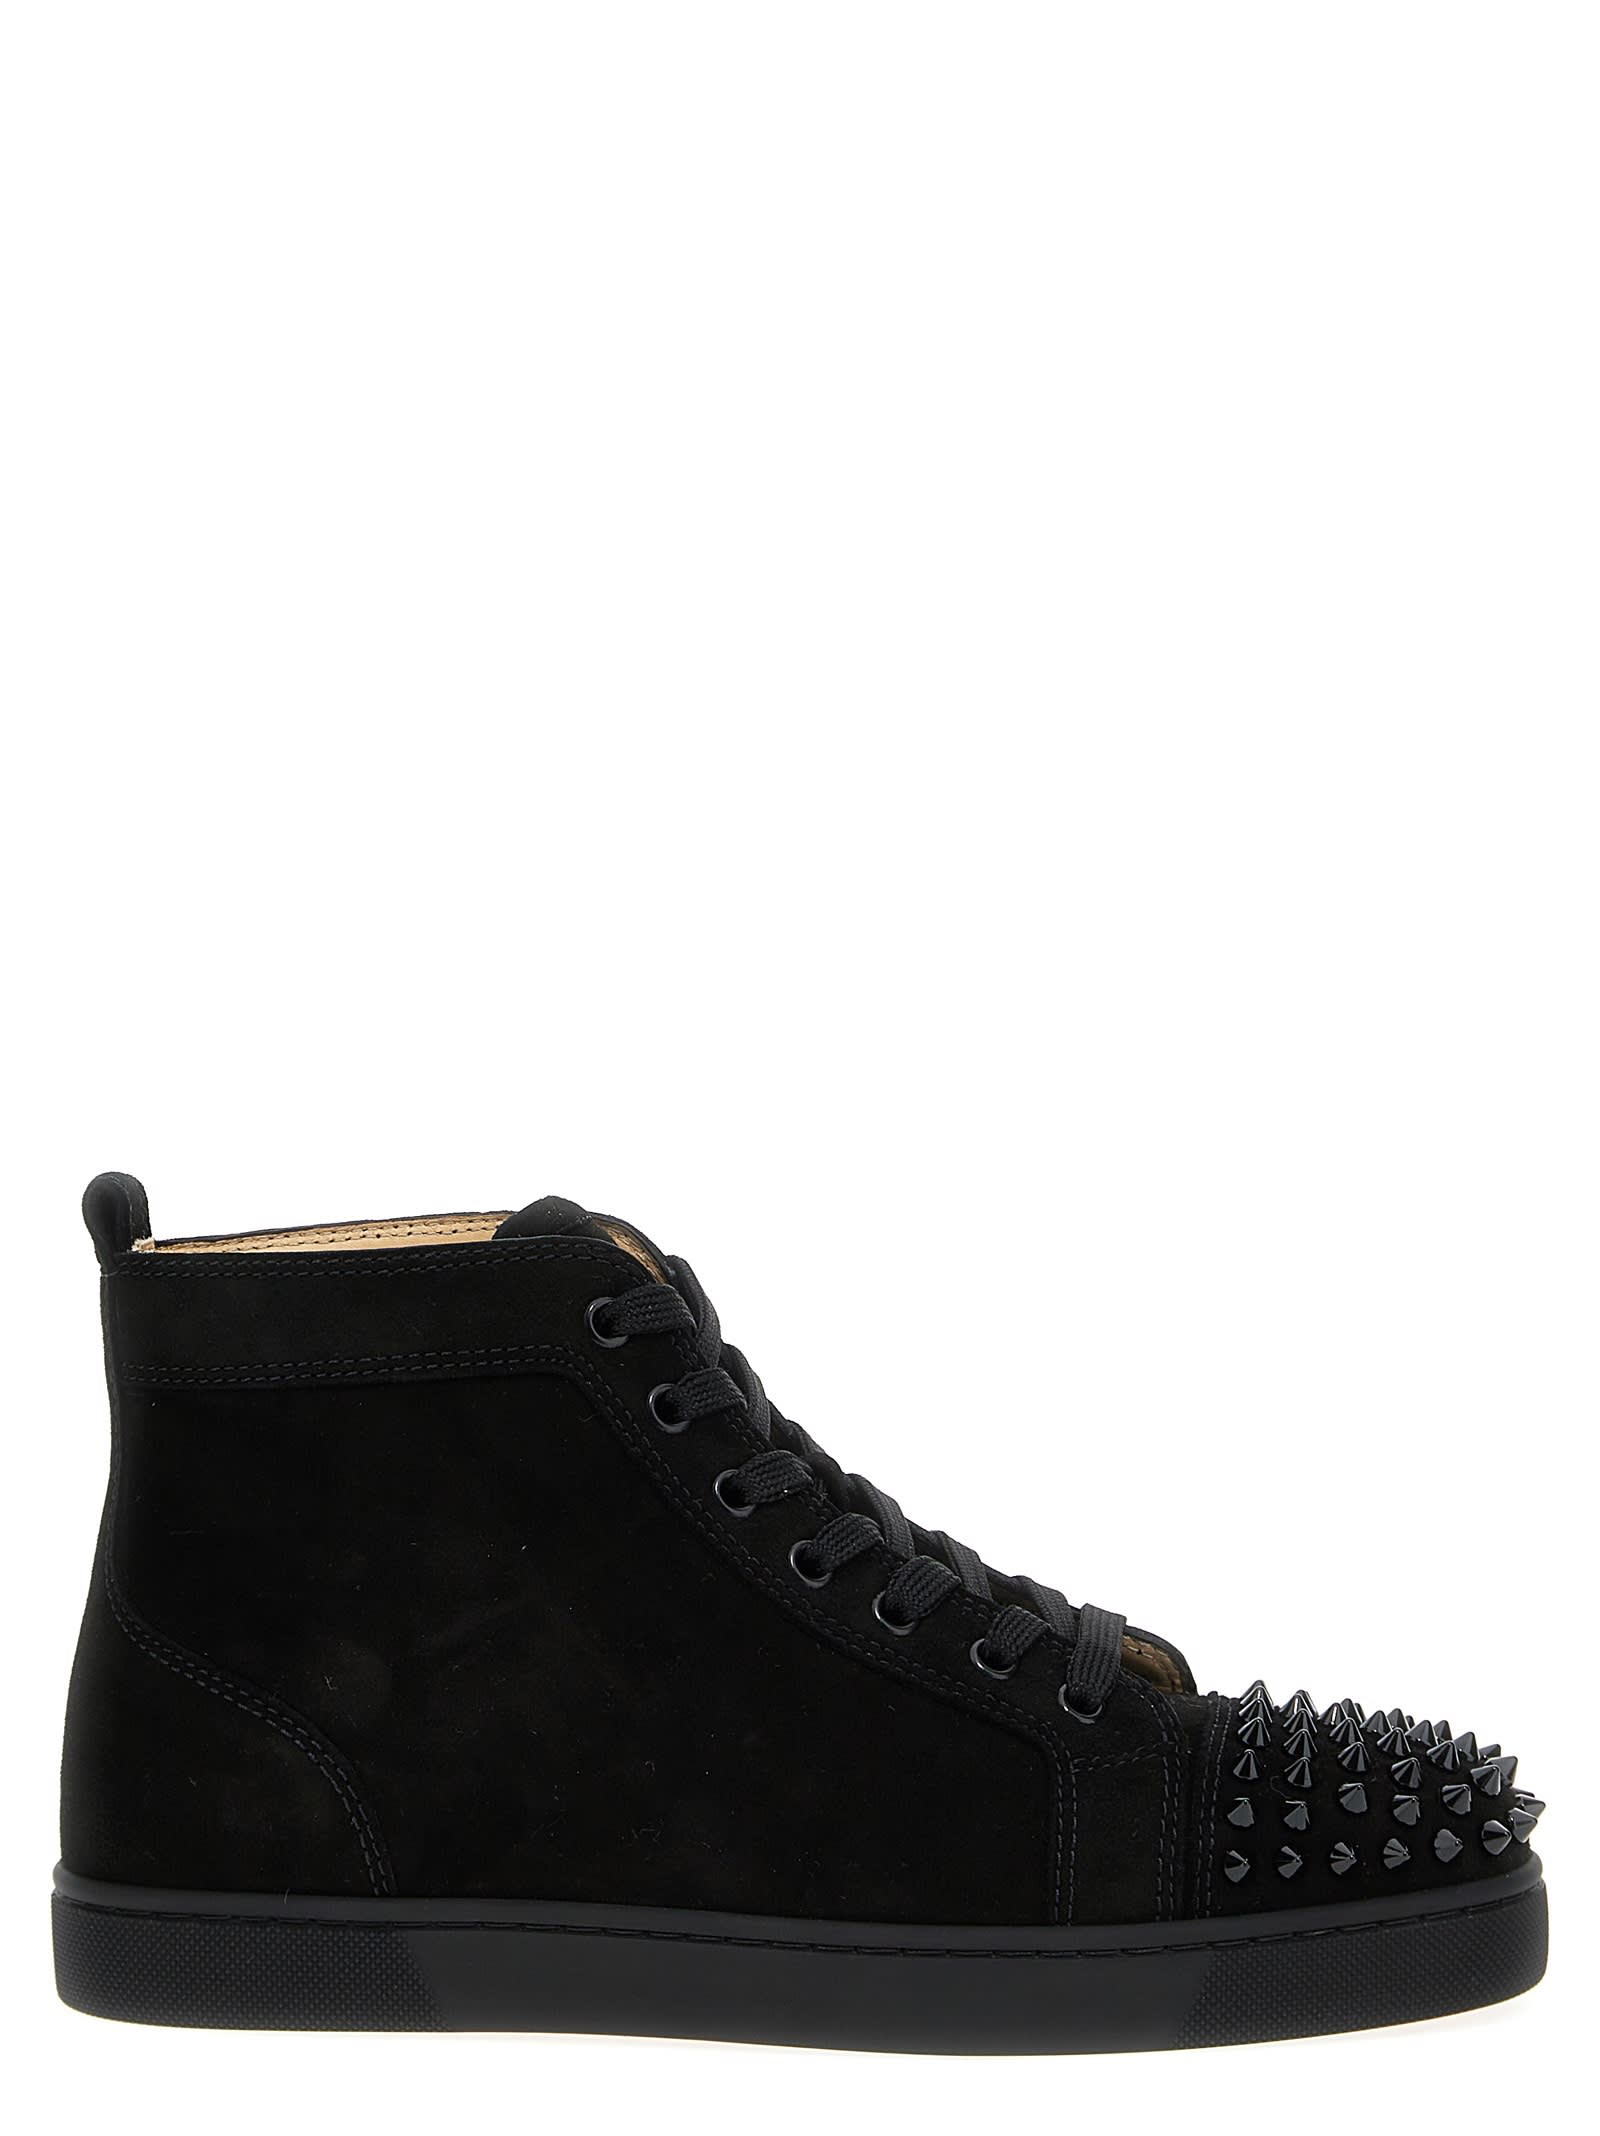 lou Spikes Flat Sneakers